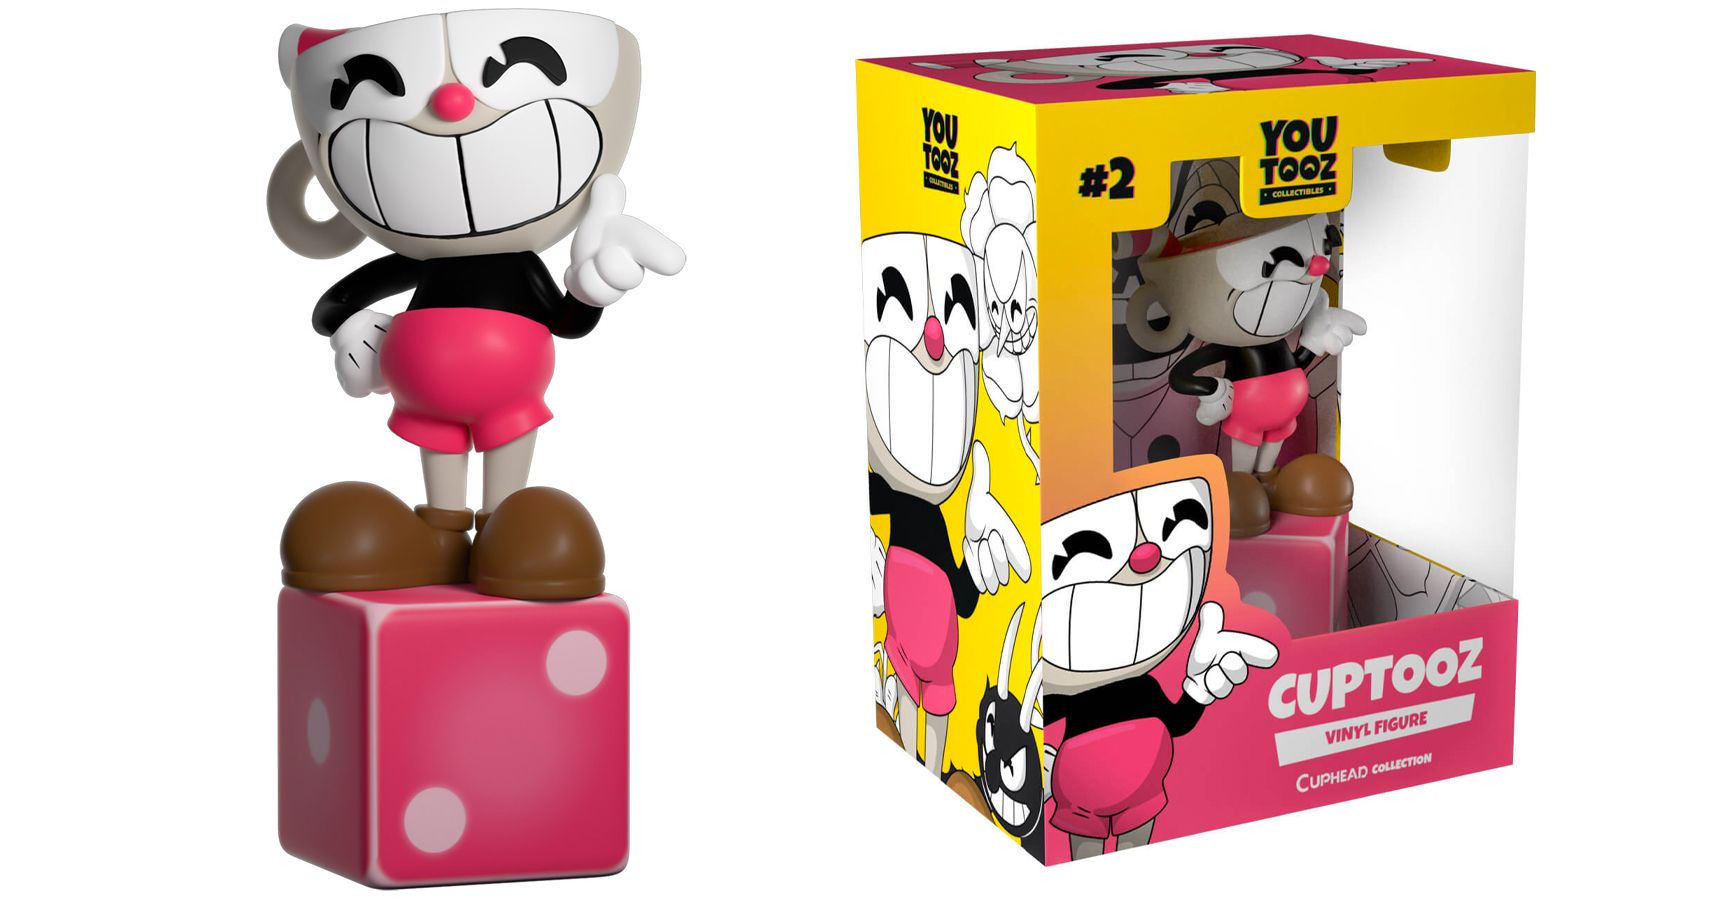 LimitedEdition Cuphead Youtooz Figurines Now Available For PreOrder